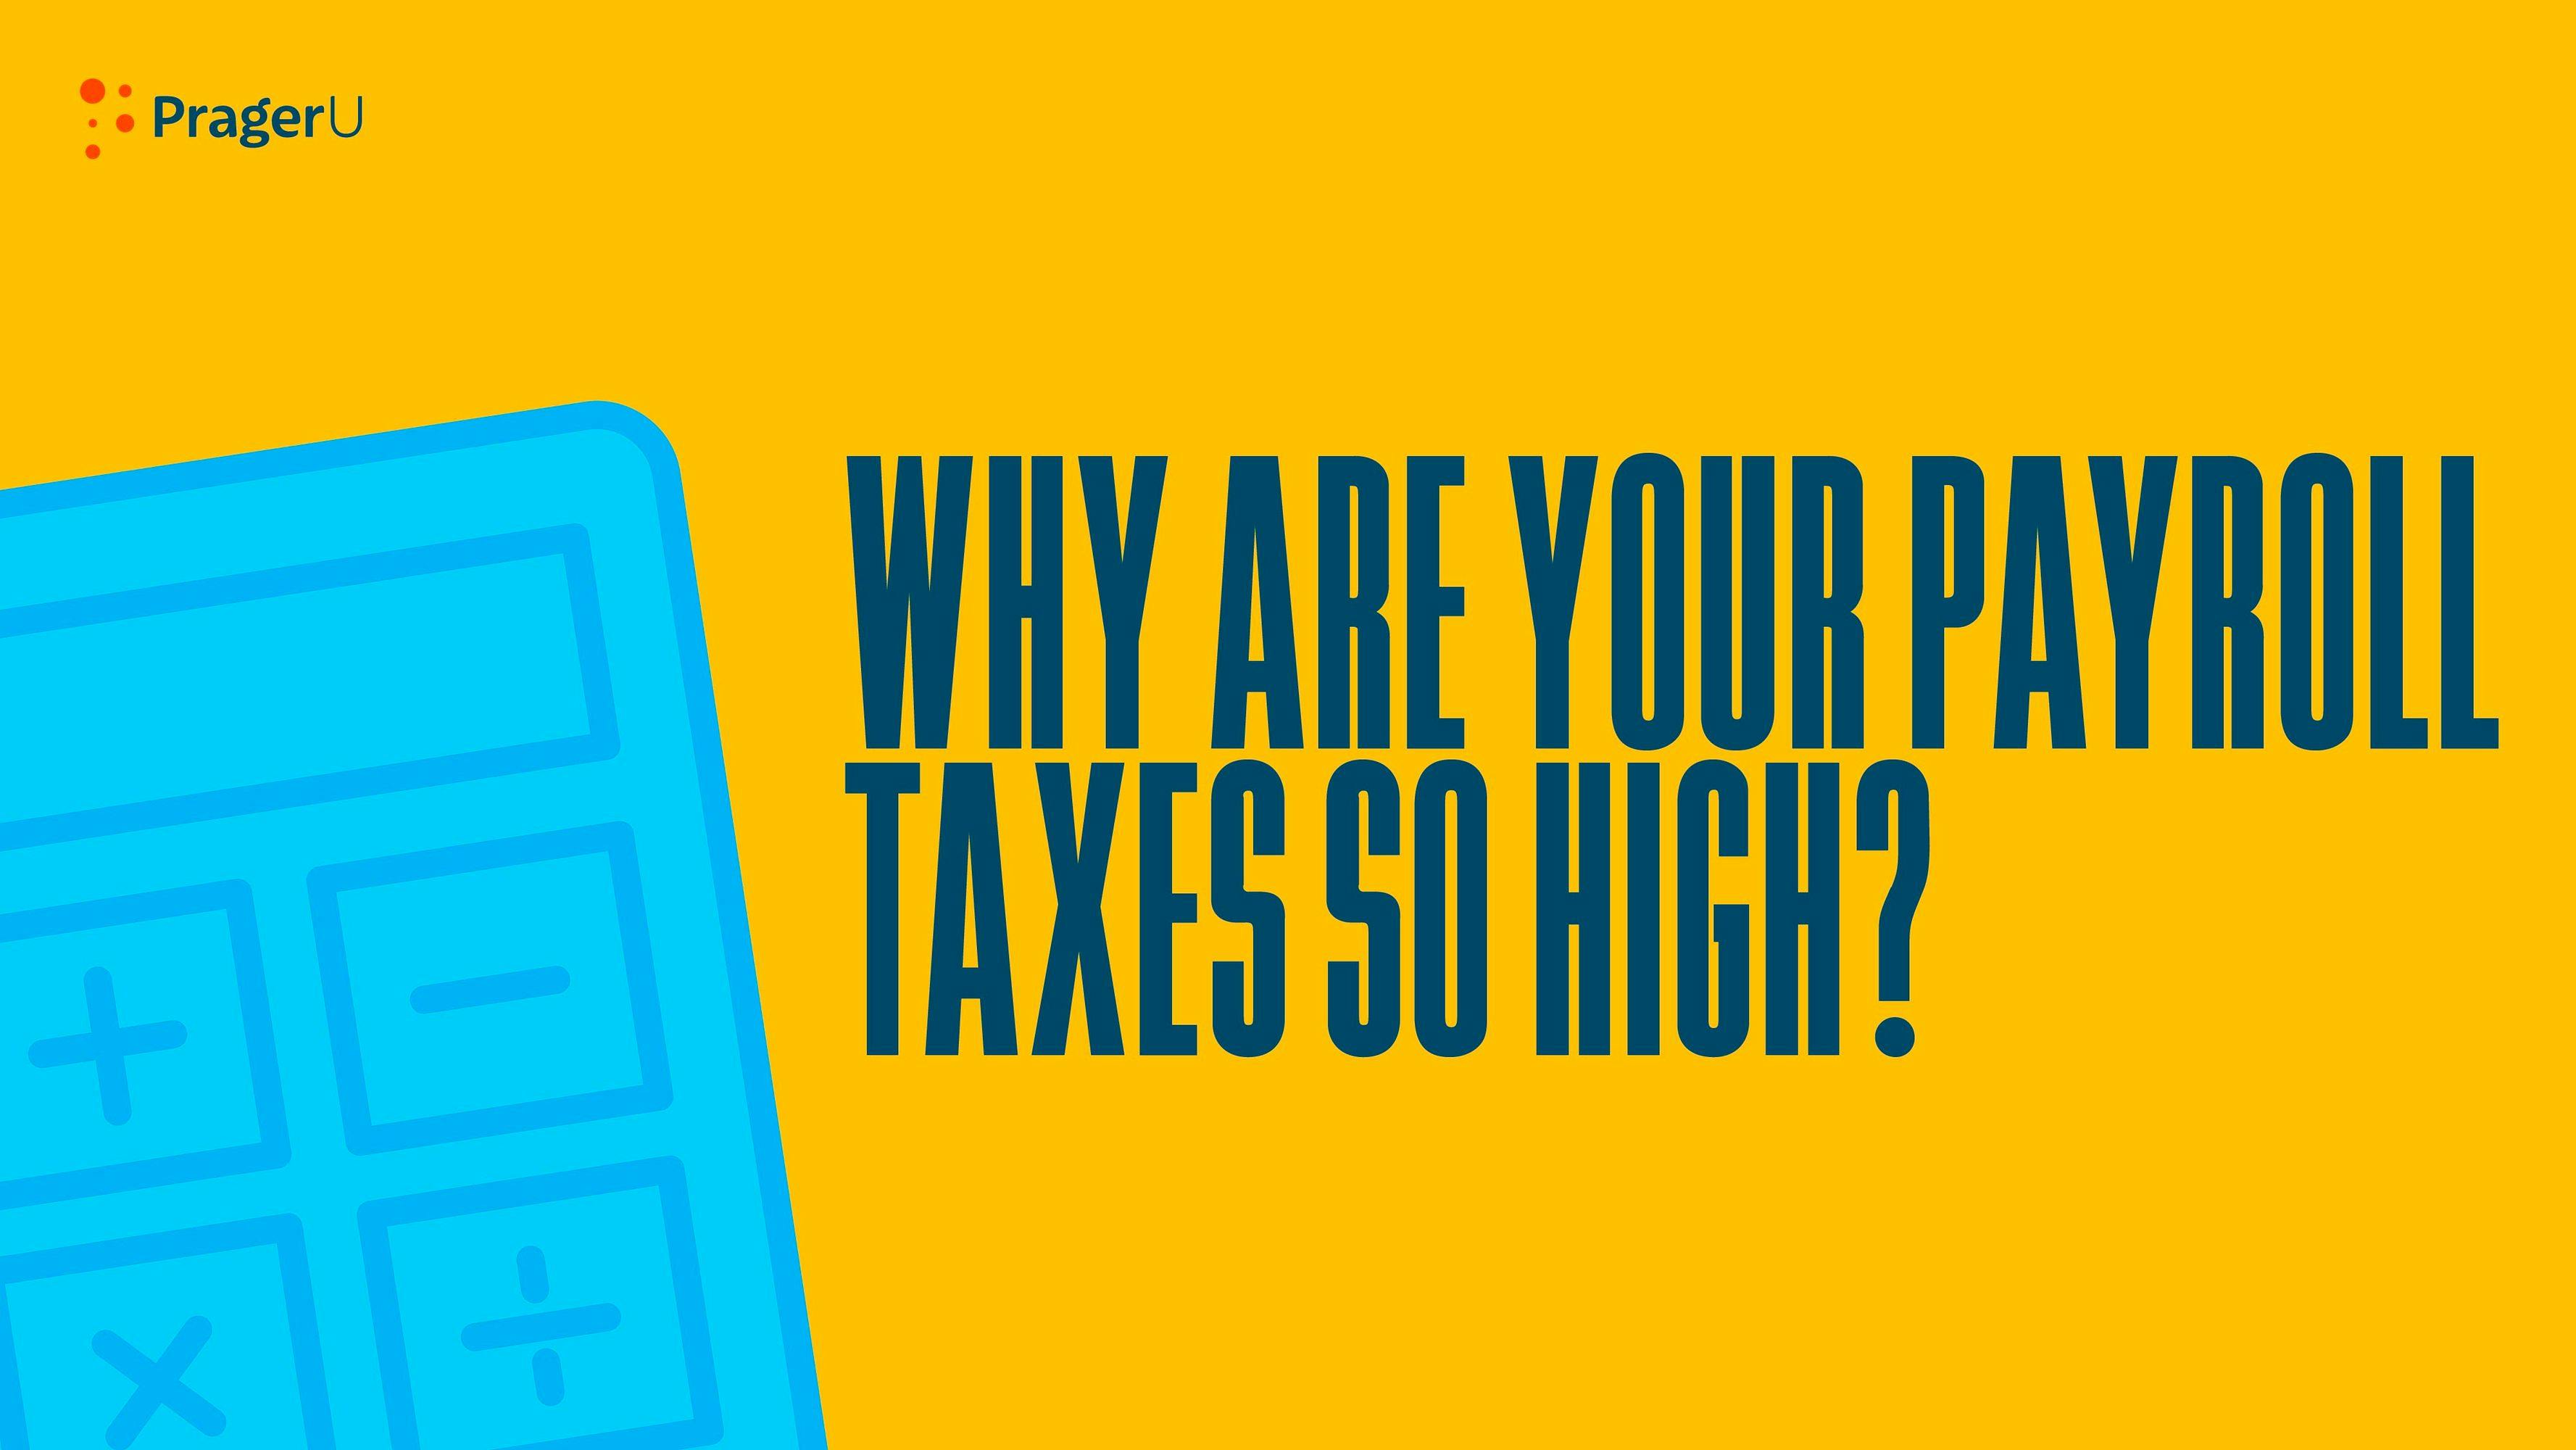 Why Are Your Payroll Taxes So High?